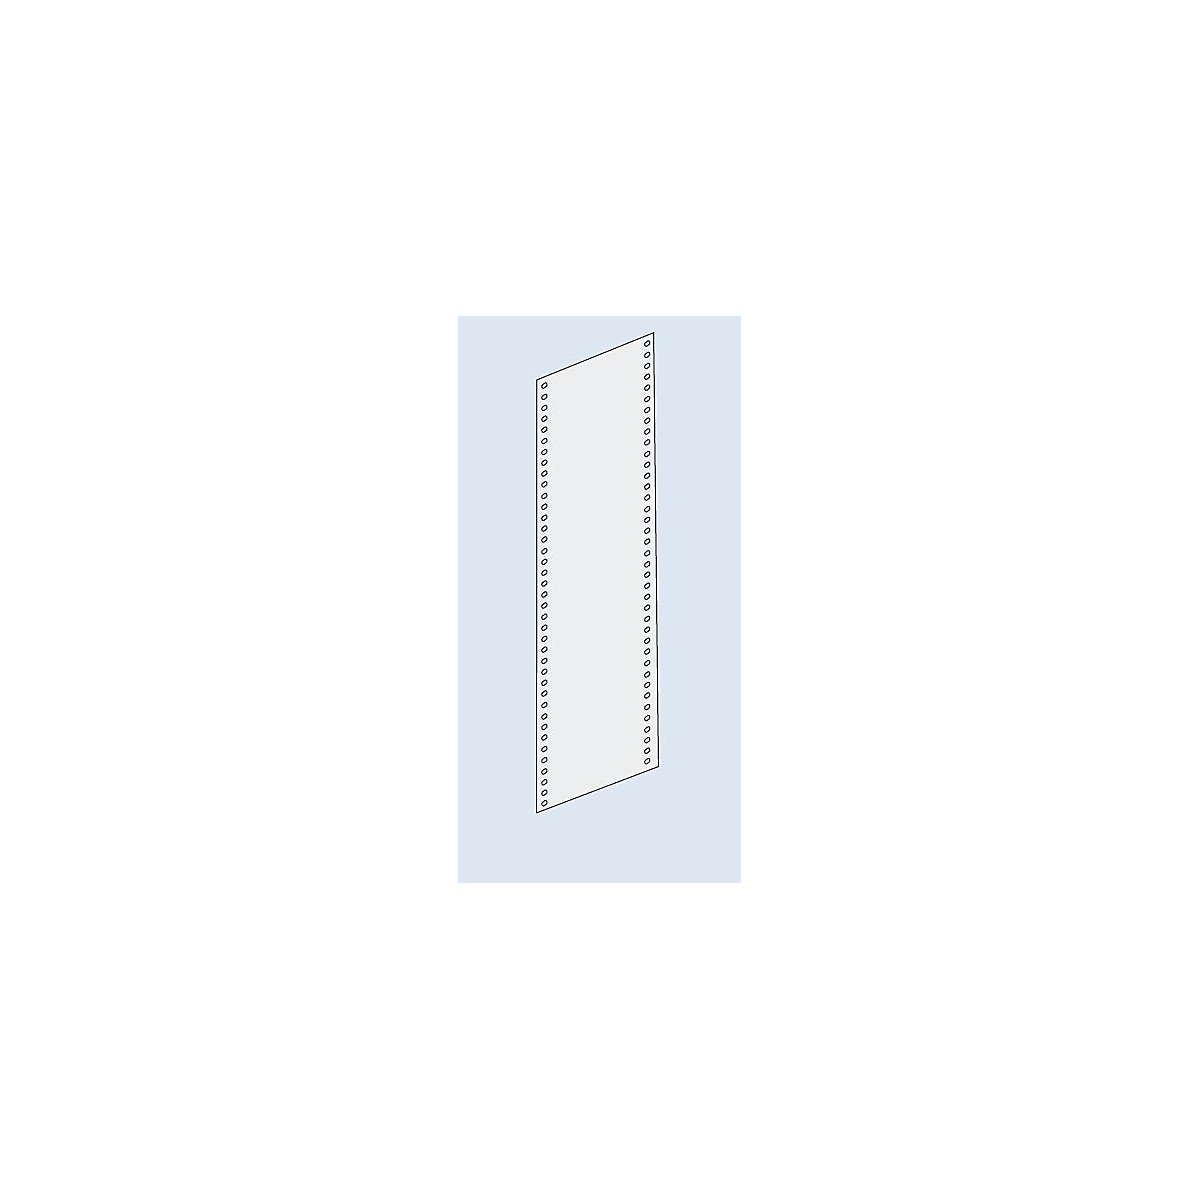 Side panel cladding – eurokraft pro, solid sheet, height 2000 mm, for depth 500 mm, zinc plated-8